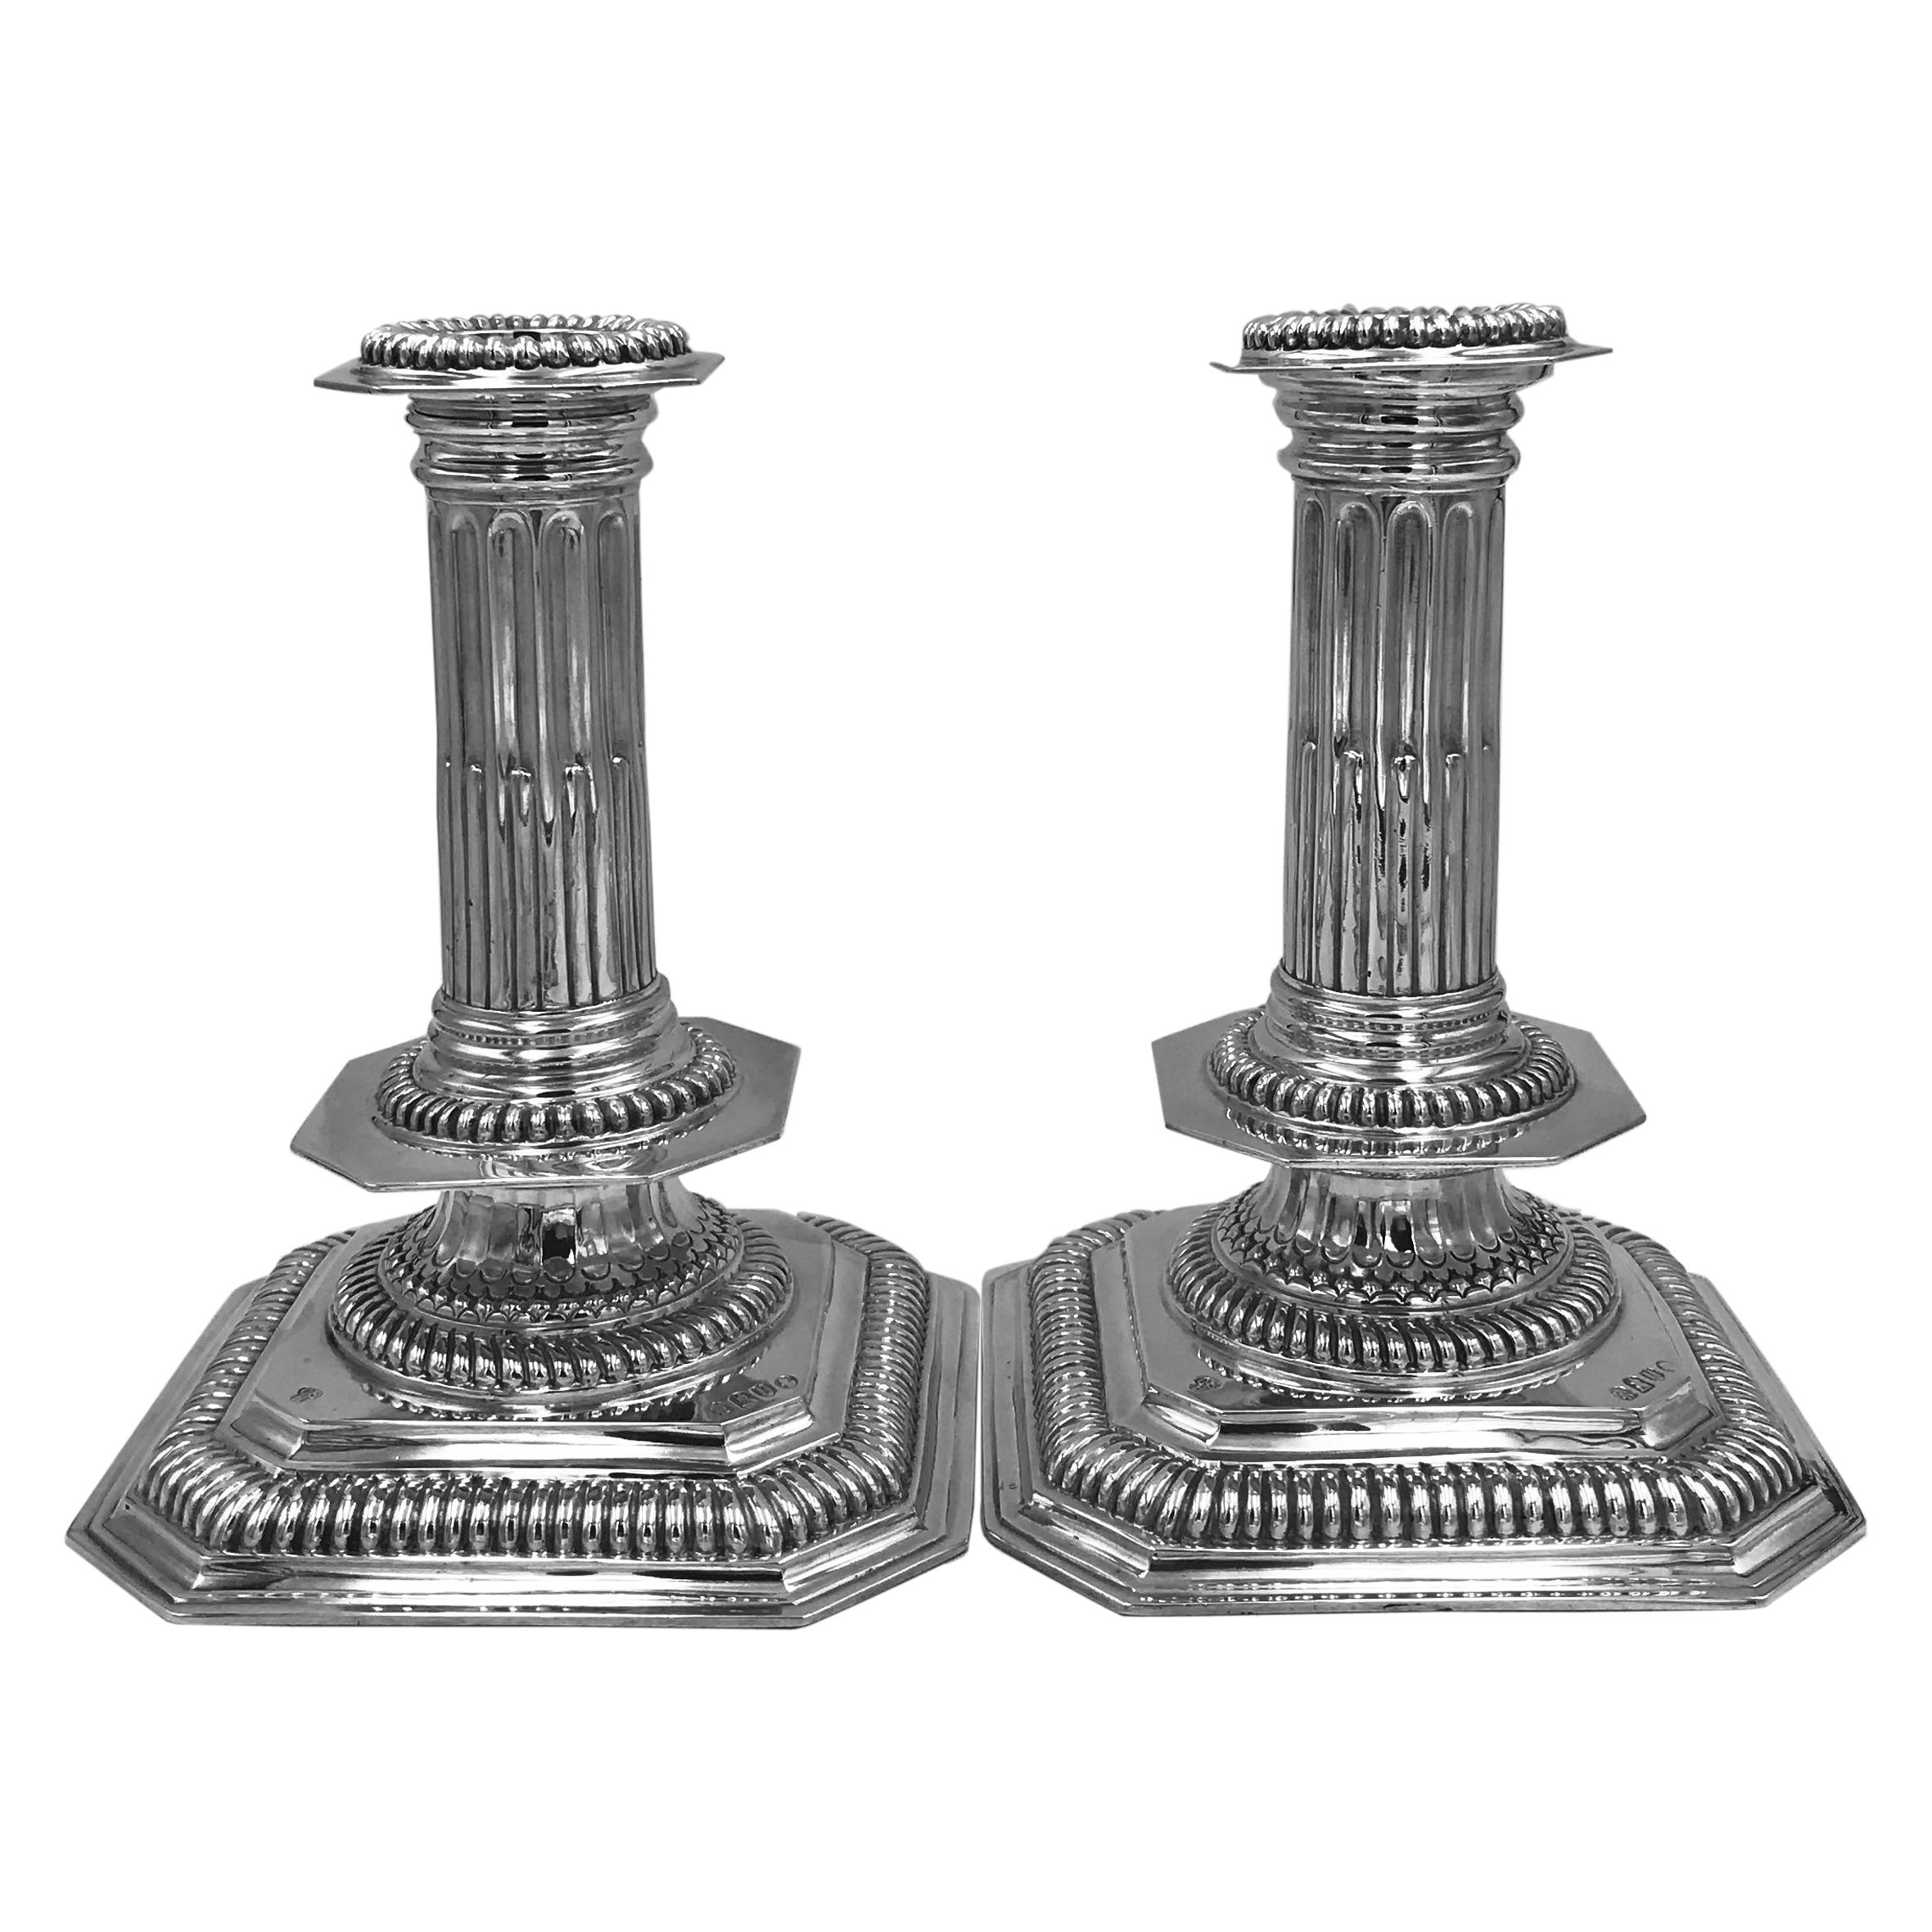 How much are sterling silver candlesticks worth?